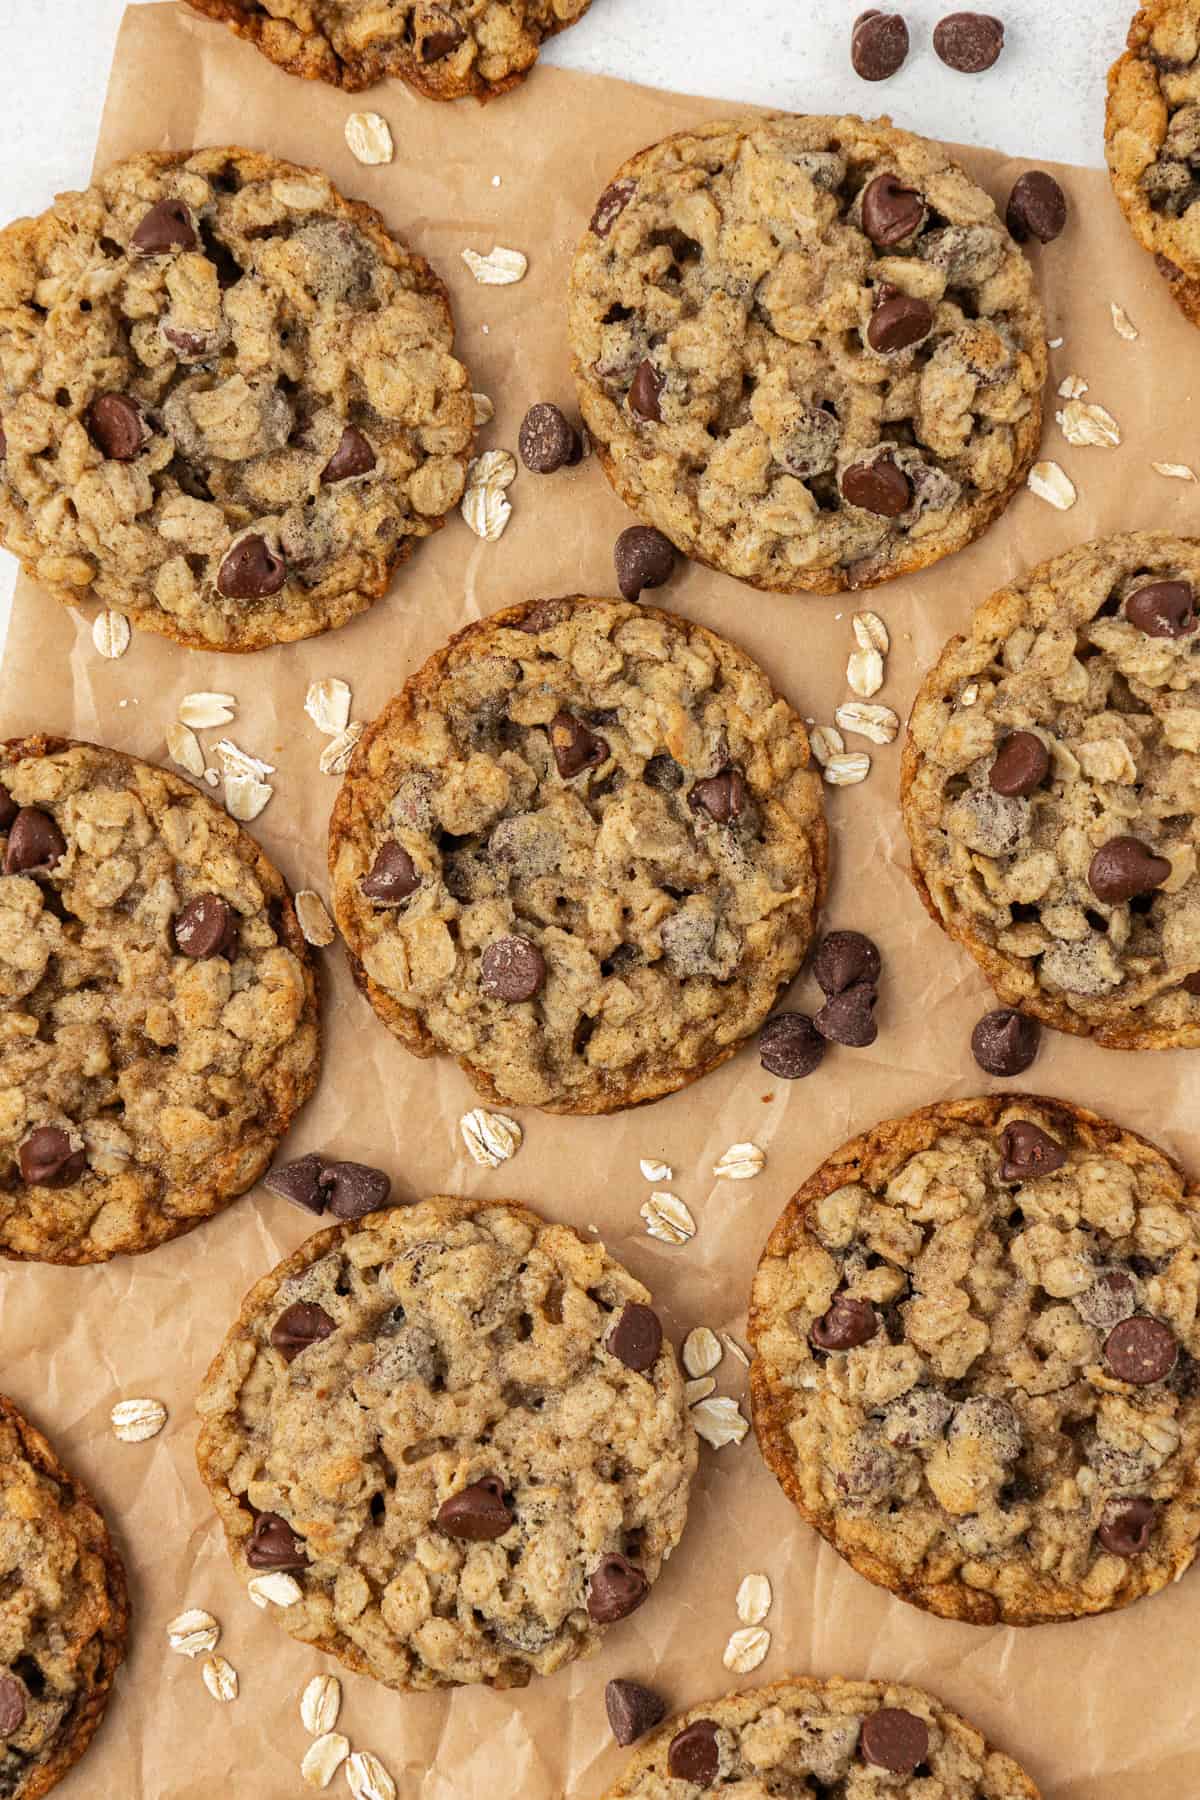 over head view of rows of oatmeal chocolate chip cookies on brown parchment paper with chocolate chips and oats scattered around between them